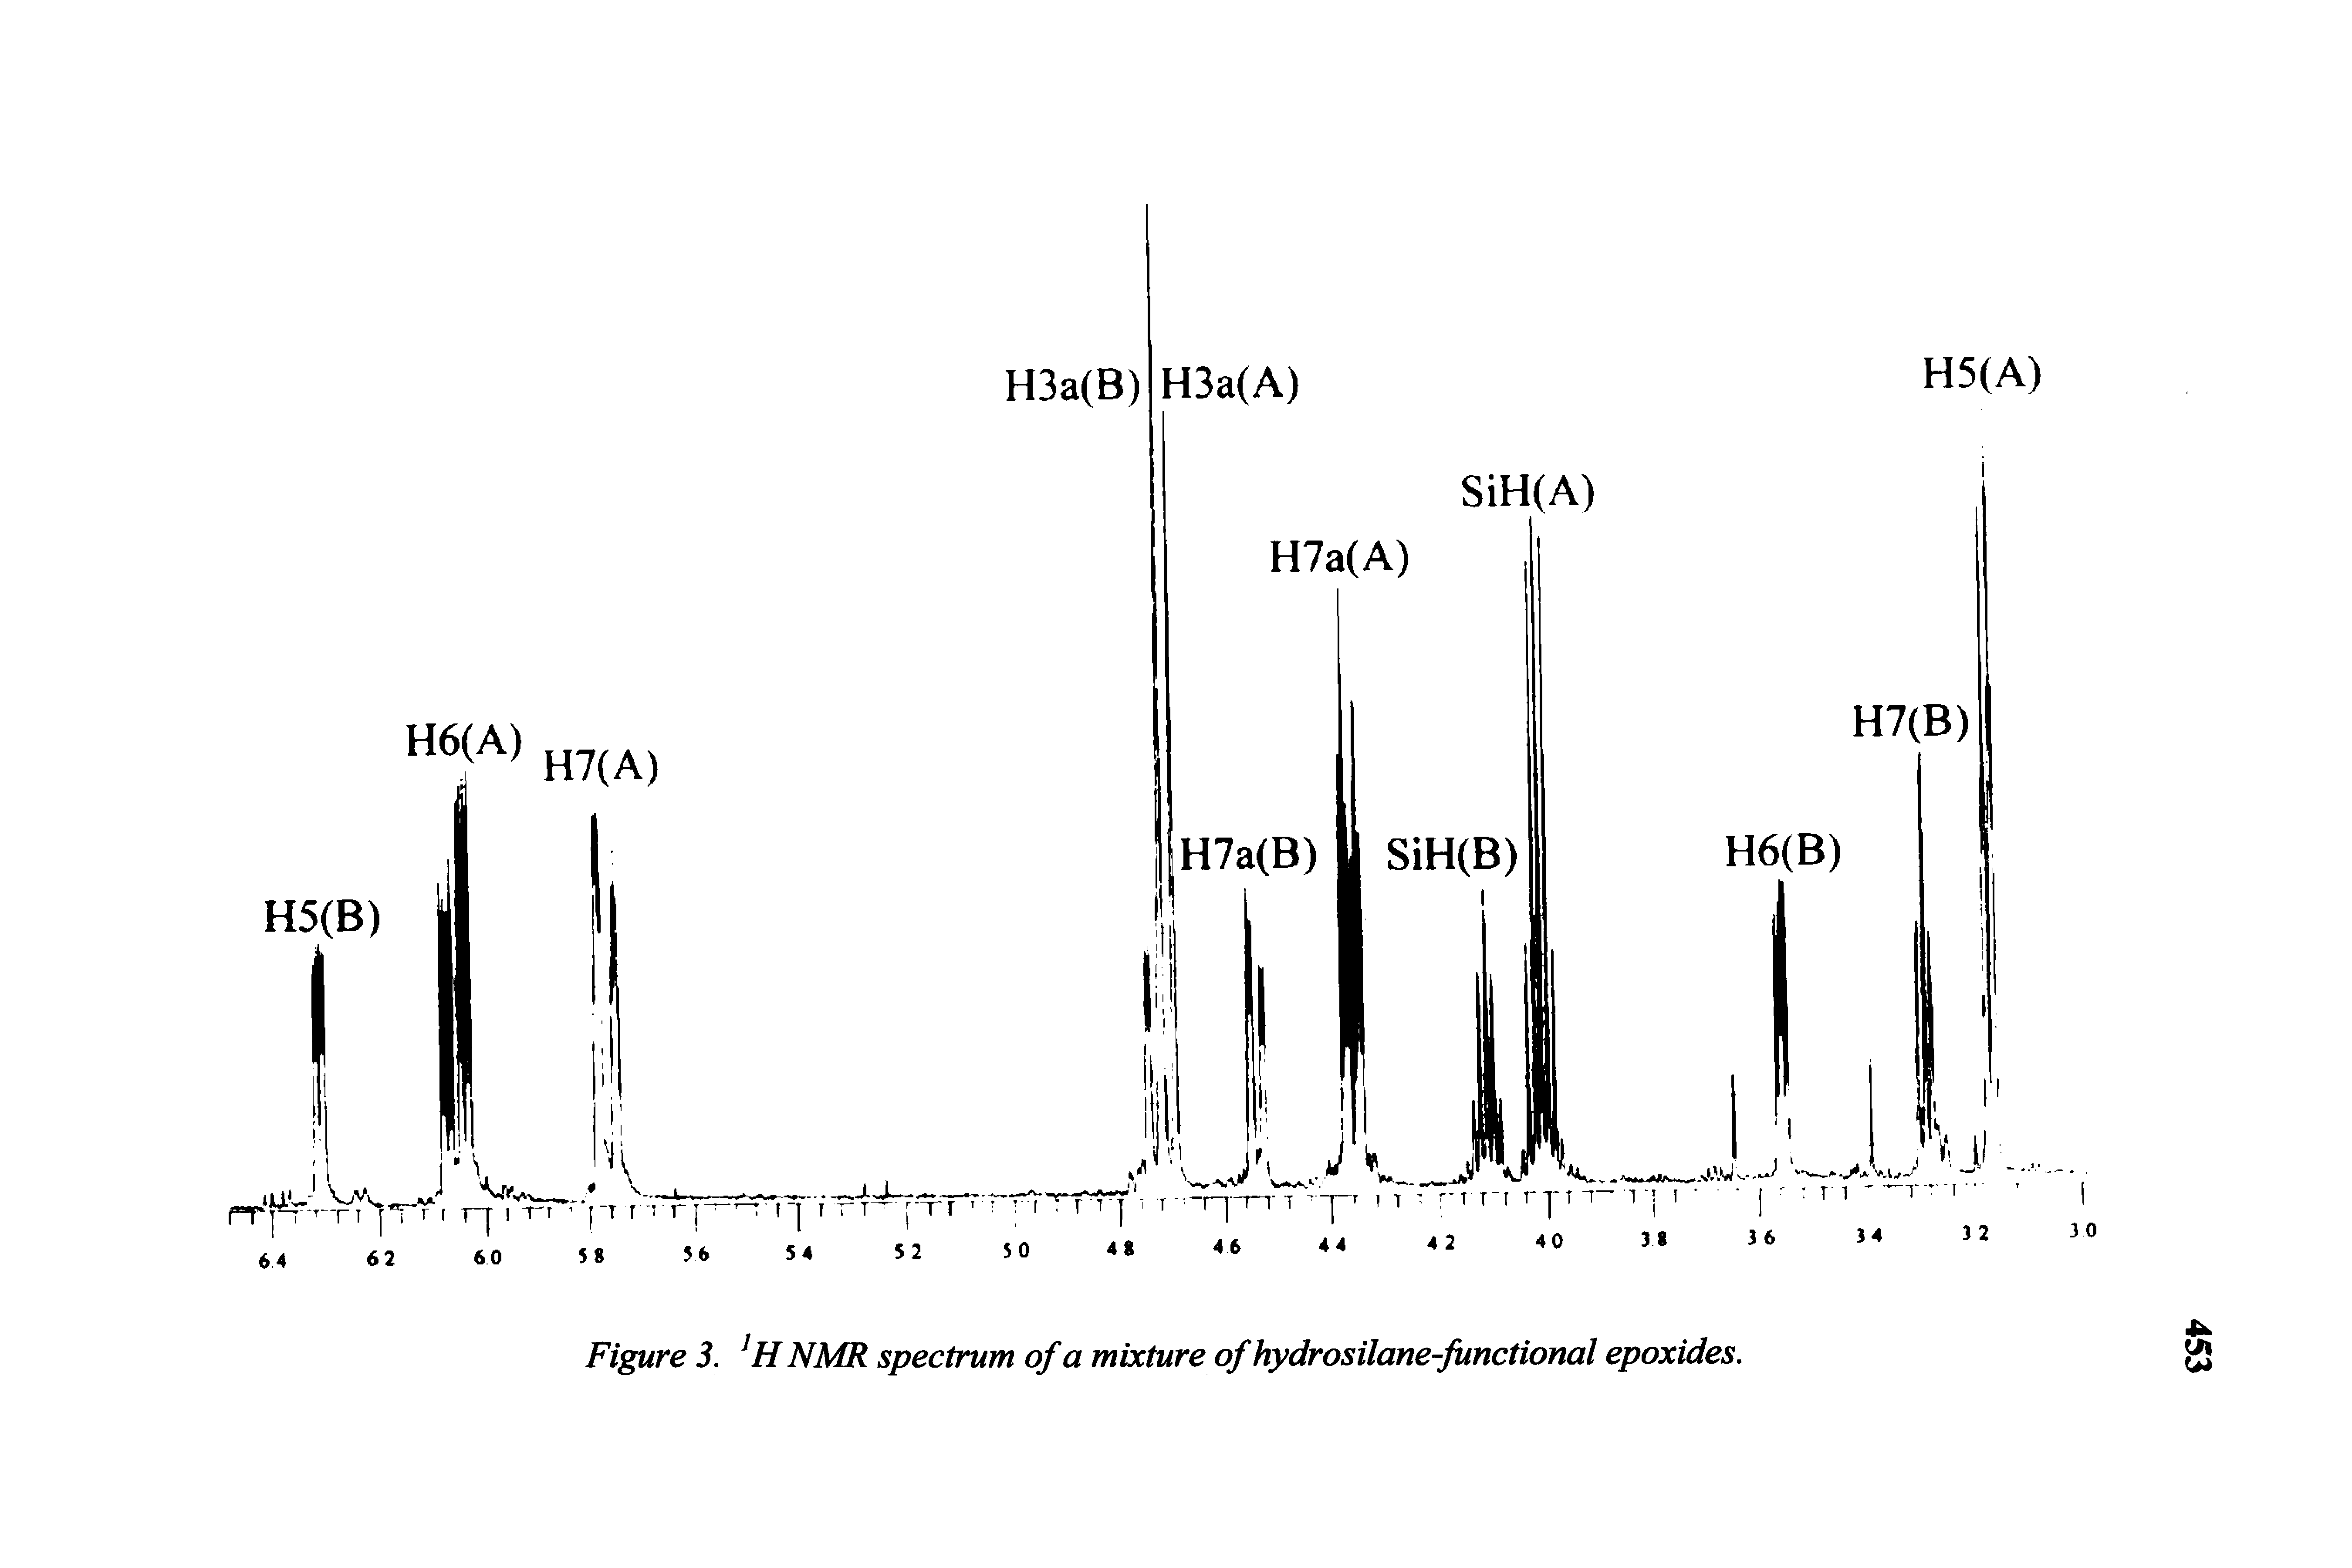 Figure 3. HNMR spectrum of a mixture of hydrosilane-functional epoxides.